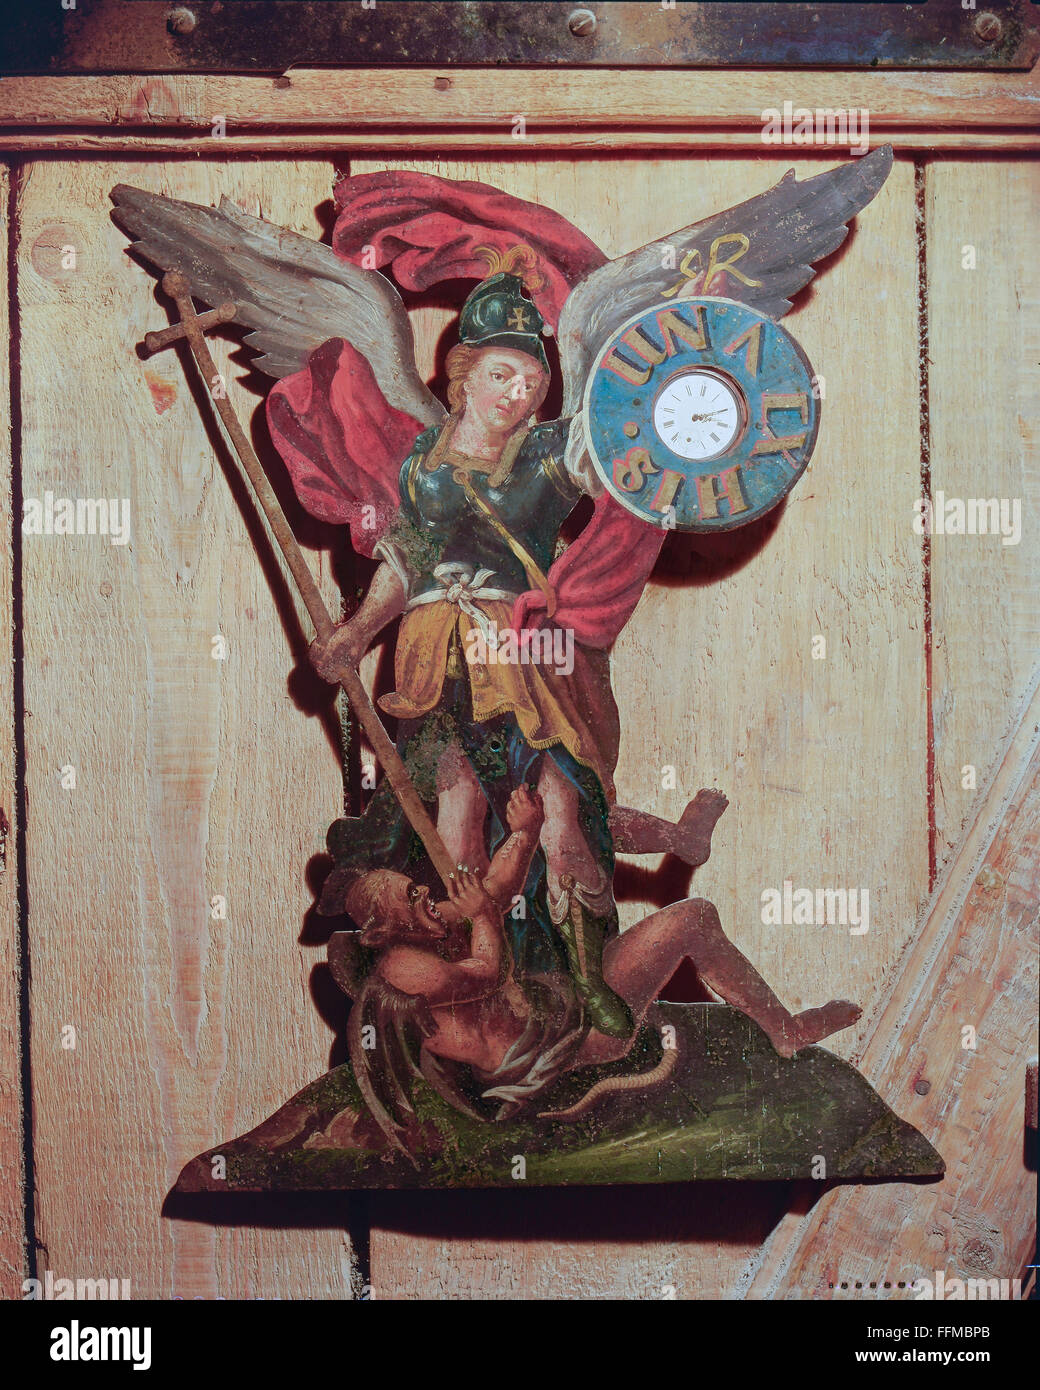 clocks, rack for a pocket watch, archangel Michael fighting against Satan, lamination, Upper Bavaria / Tyrol, early 18th century, private collection, Switzerland, 18th century, fine arts, art, handicrafts, handcraft, craft, Germany, Bavaria, Austria, storage, rack, racks, religion, religions, Christianity, angel, angels, fights, struggle, struggles, battling, battle, devil, devils, clock, clocks, pocket watch, watch, pocket watches, watches, archangel, archangels, fighting, fight, lamination, laminations, historic, historical, male, man, people, men, Additional-Rights-Clearences-Not Available Stock Photo